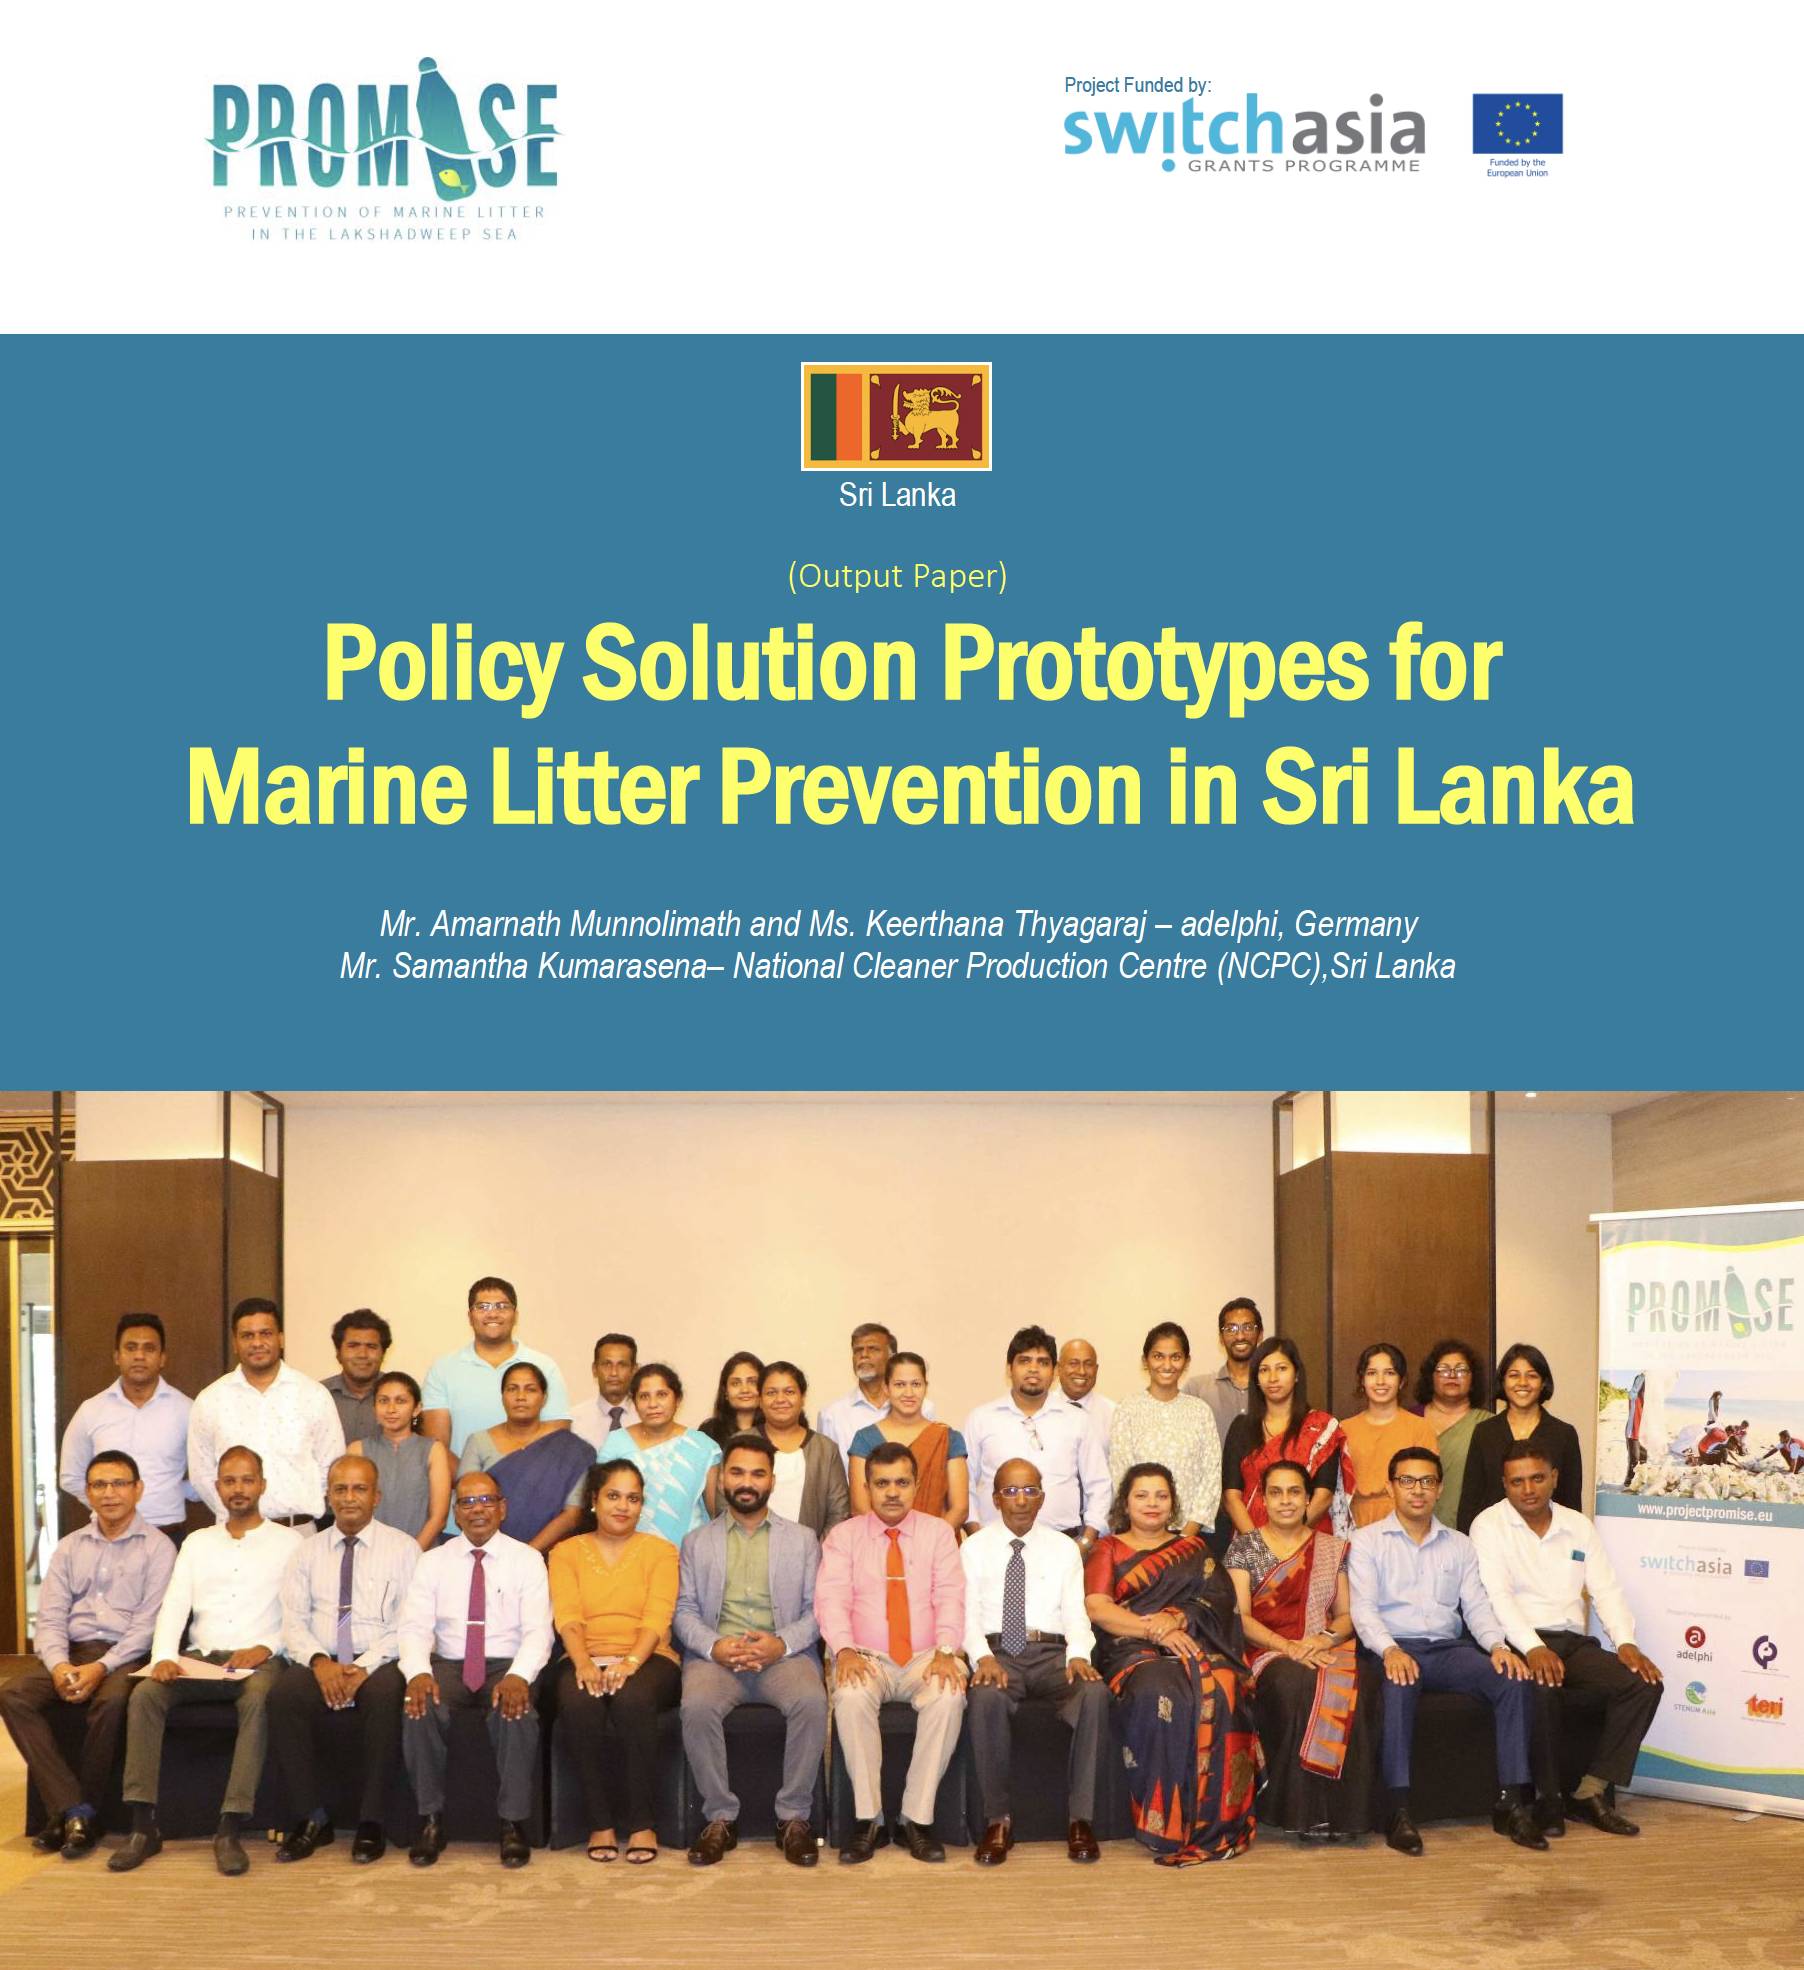 Policy Solution Prototypes for Marine Litter Prevention in Sri Lanka